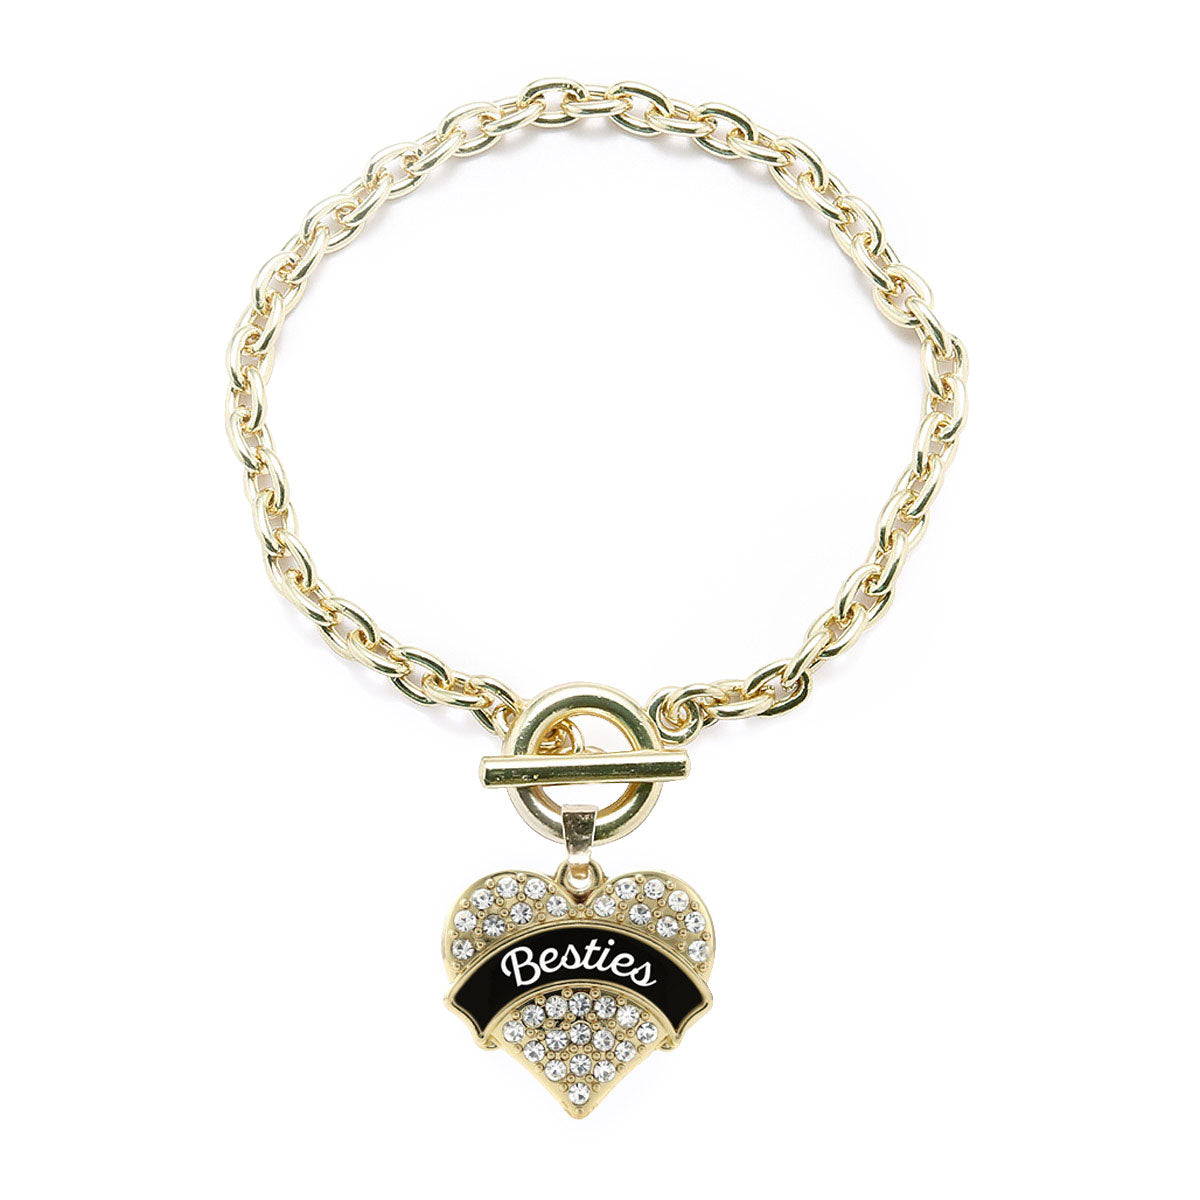 Gold Black and White Besties Pave Heart Charm Toggle Bracelet